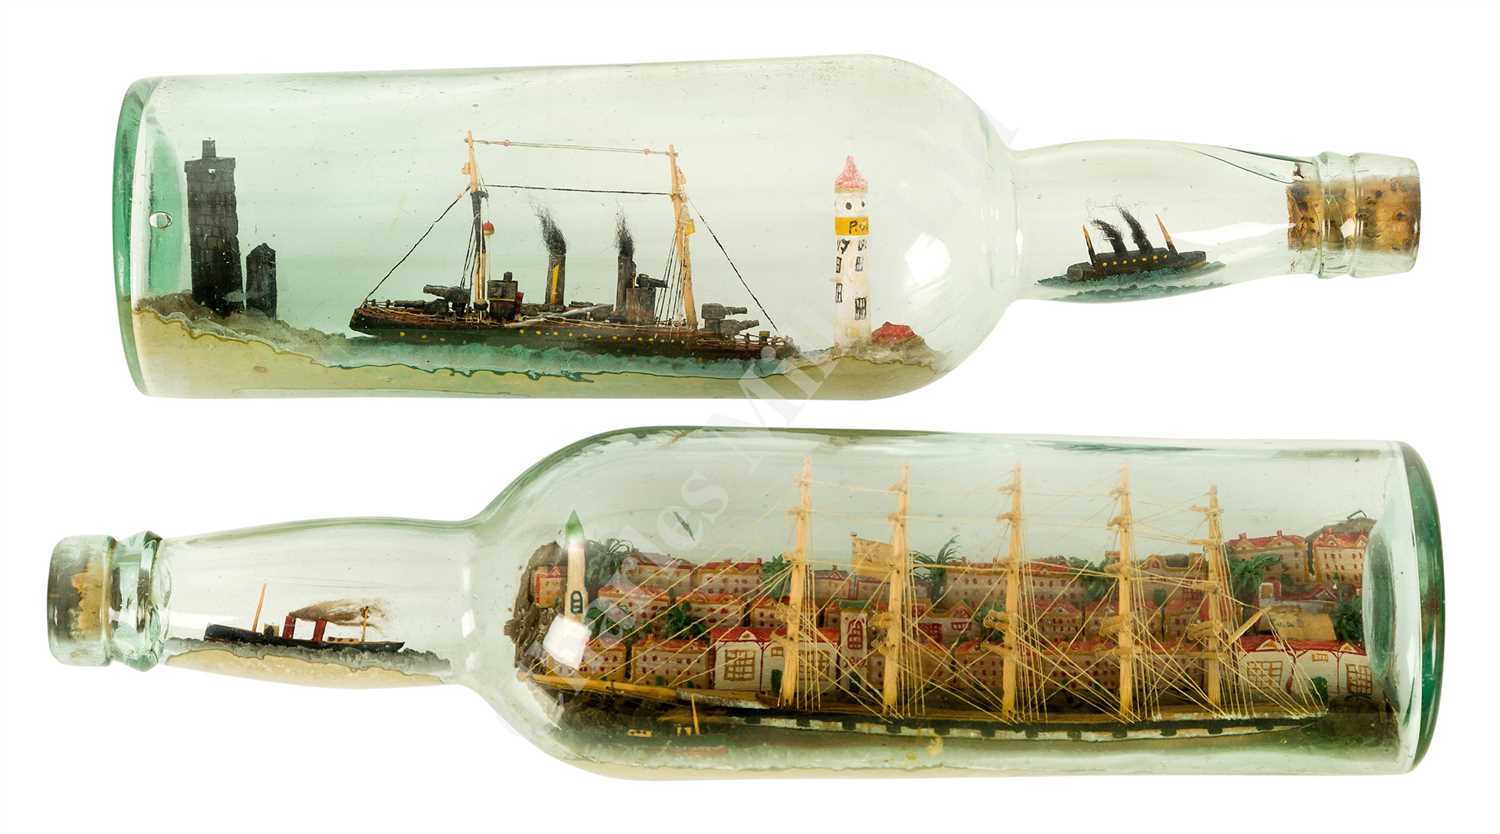 Lot 100 - AN HISTORICALLY INTERESTING PAIR OF SHIPS IN BOTTLES MODELLED BY A GERMAN PRISONER ON THE ISLE OF MAN, 1917